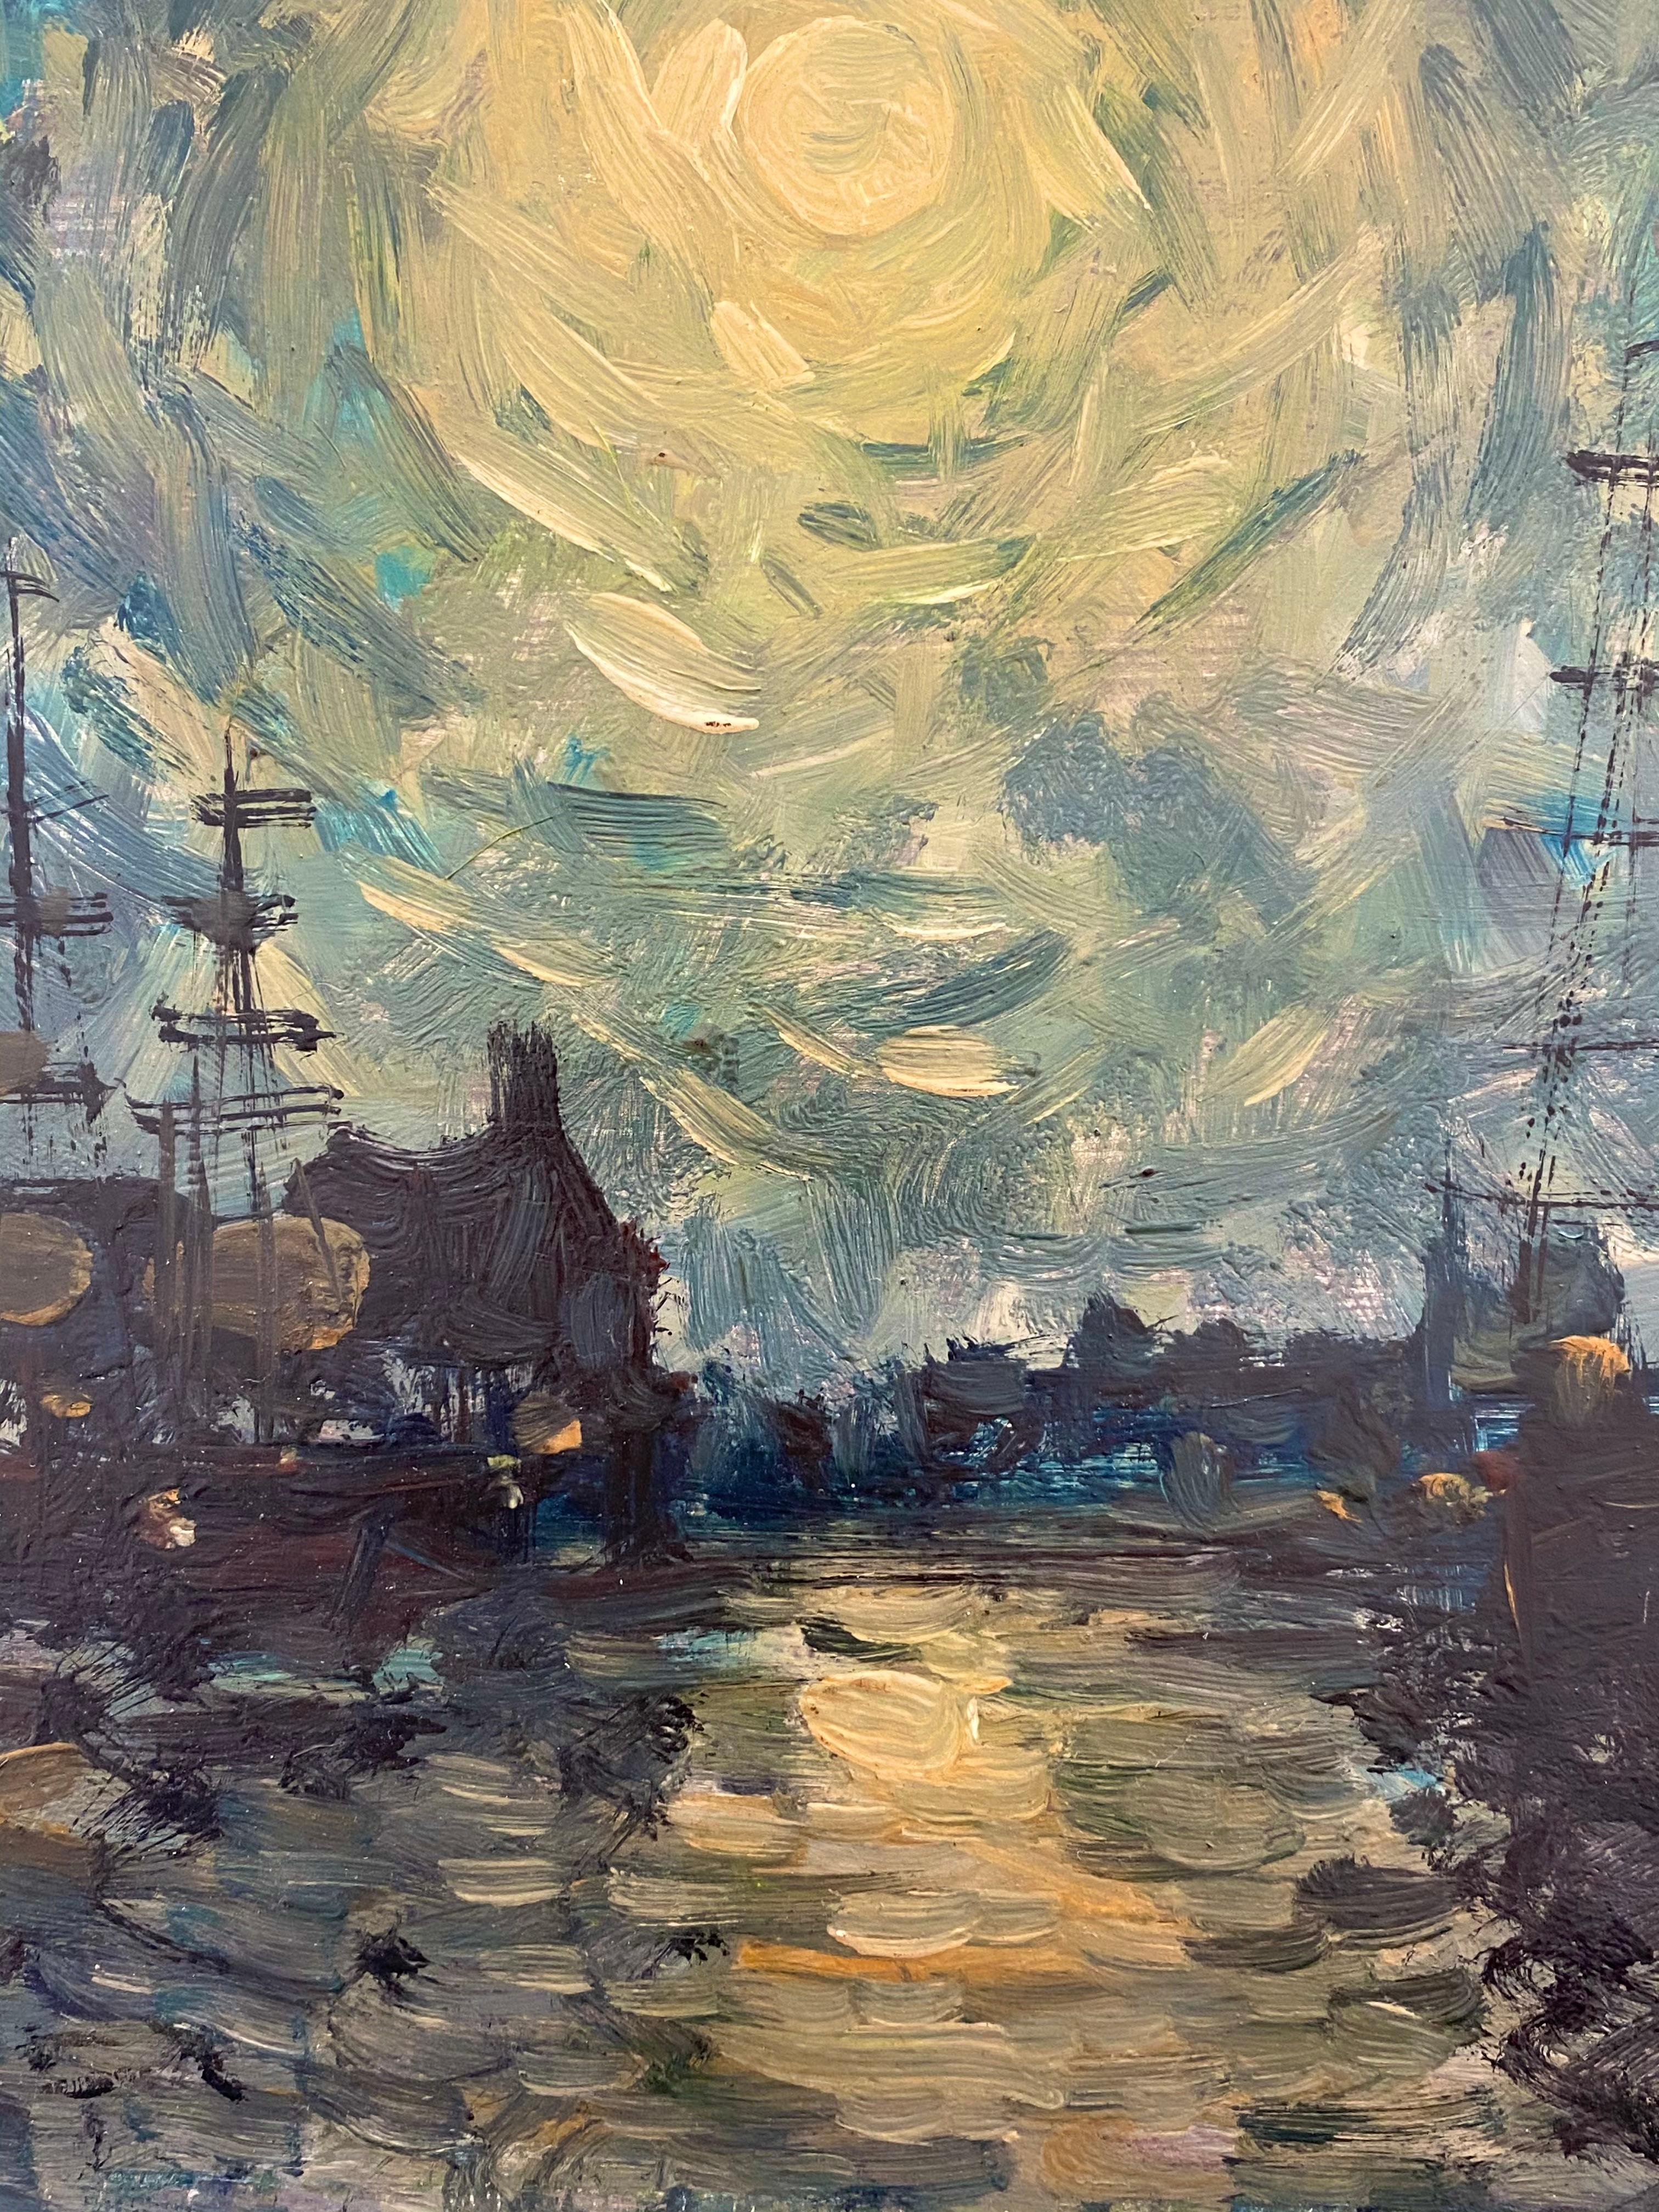 Magnificent French impressionist painting depicting a harbour illuminated by moon light. 

This painting is very reminiscent of the famous 